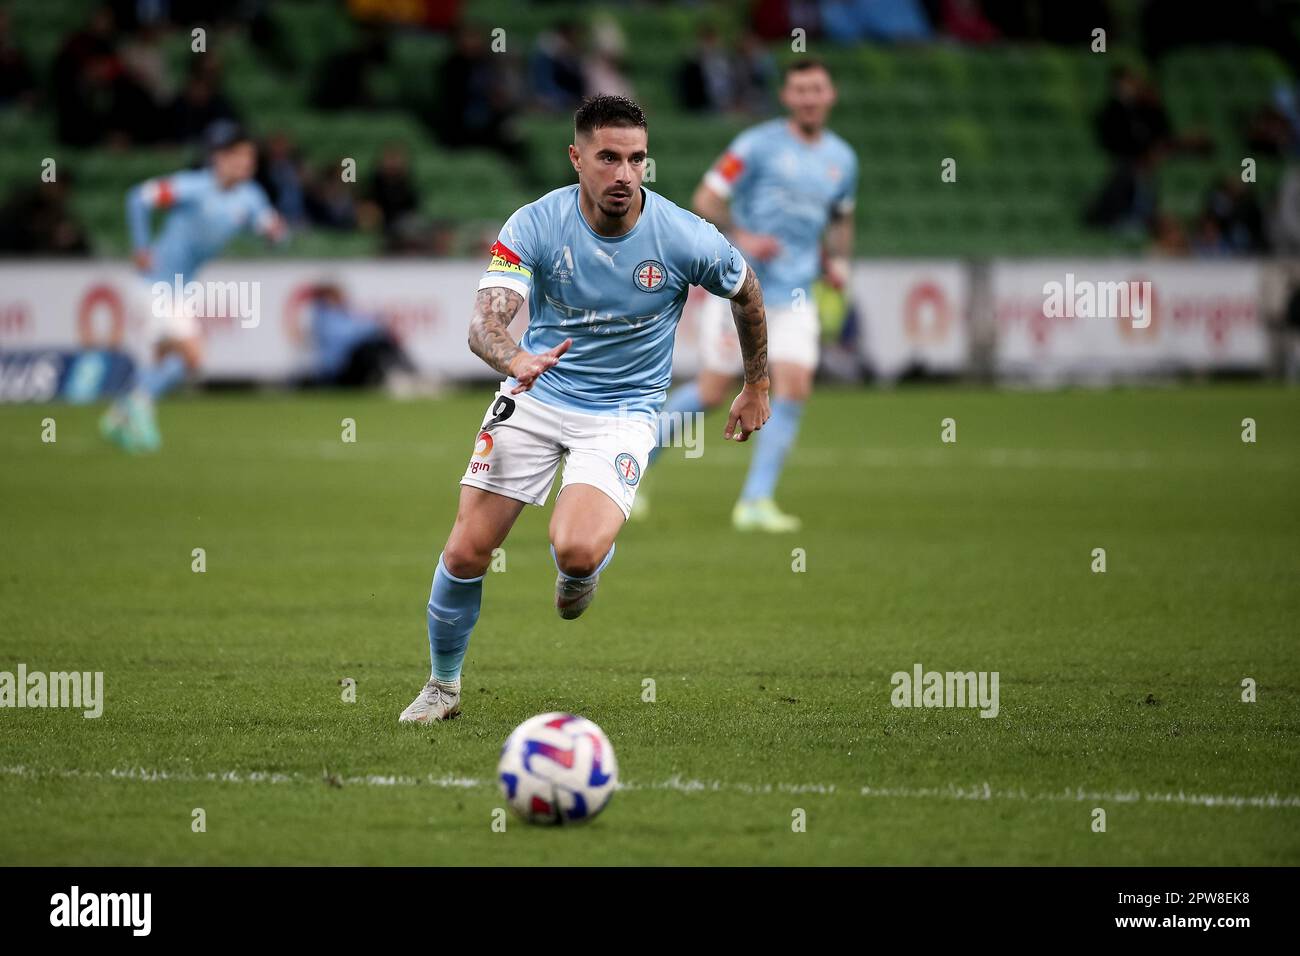 Melbourne, Australia, 28 April, 2023. Jamie Maclaren of Melbourne City FC controls the ball during the A-League Men's football match between Melbourne City and Western Sydney Wanderers at AAMI Park on April 28, 2023 in Melbourne, Australia. Credit: Dave Hewison/Alamy Live News Stock Photo